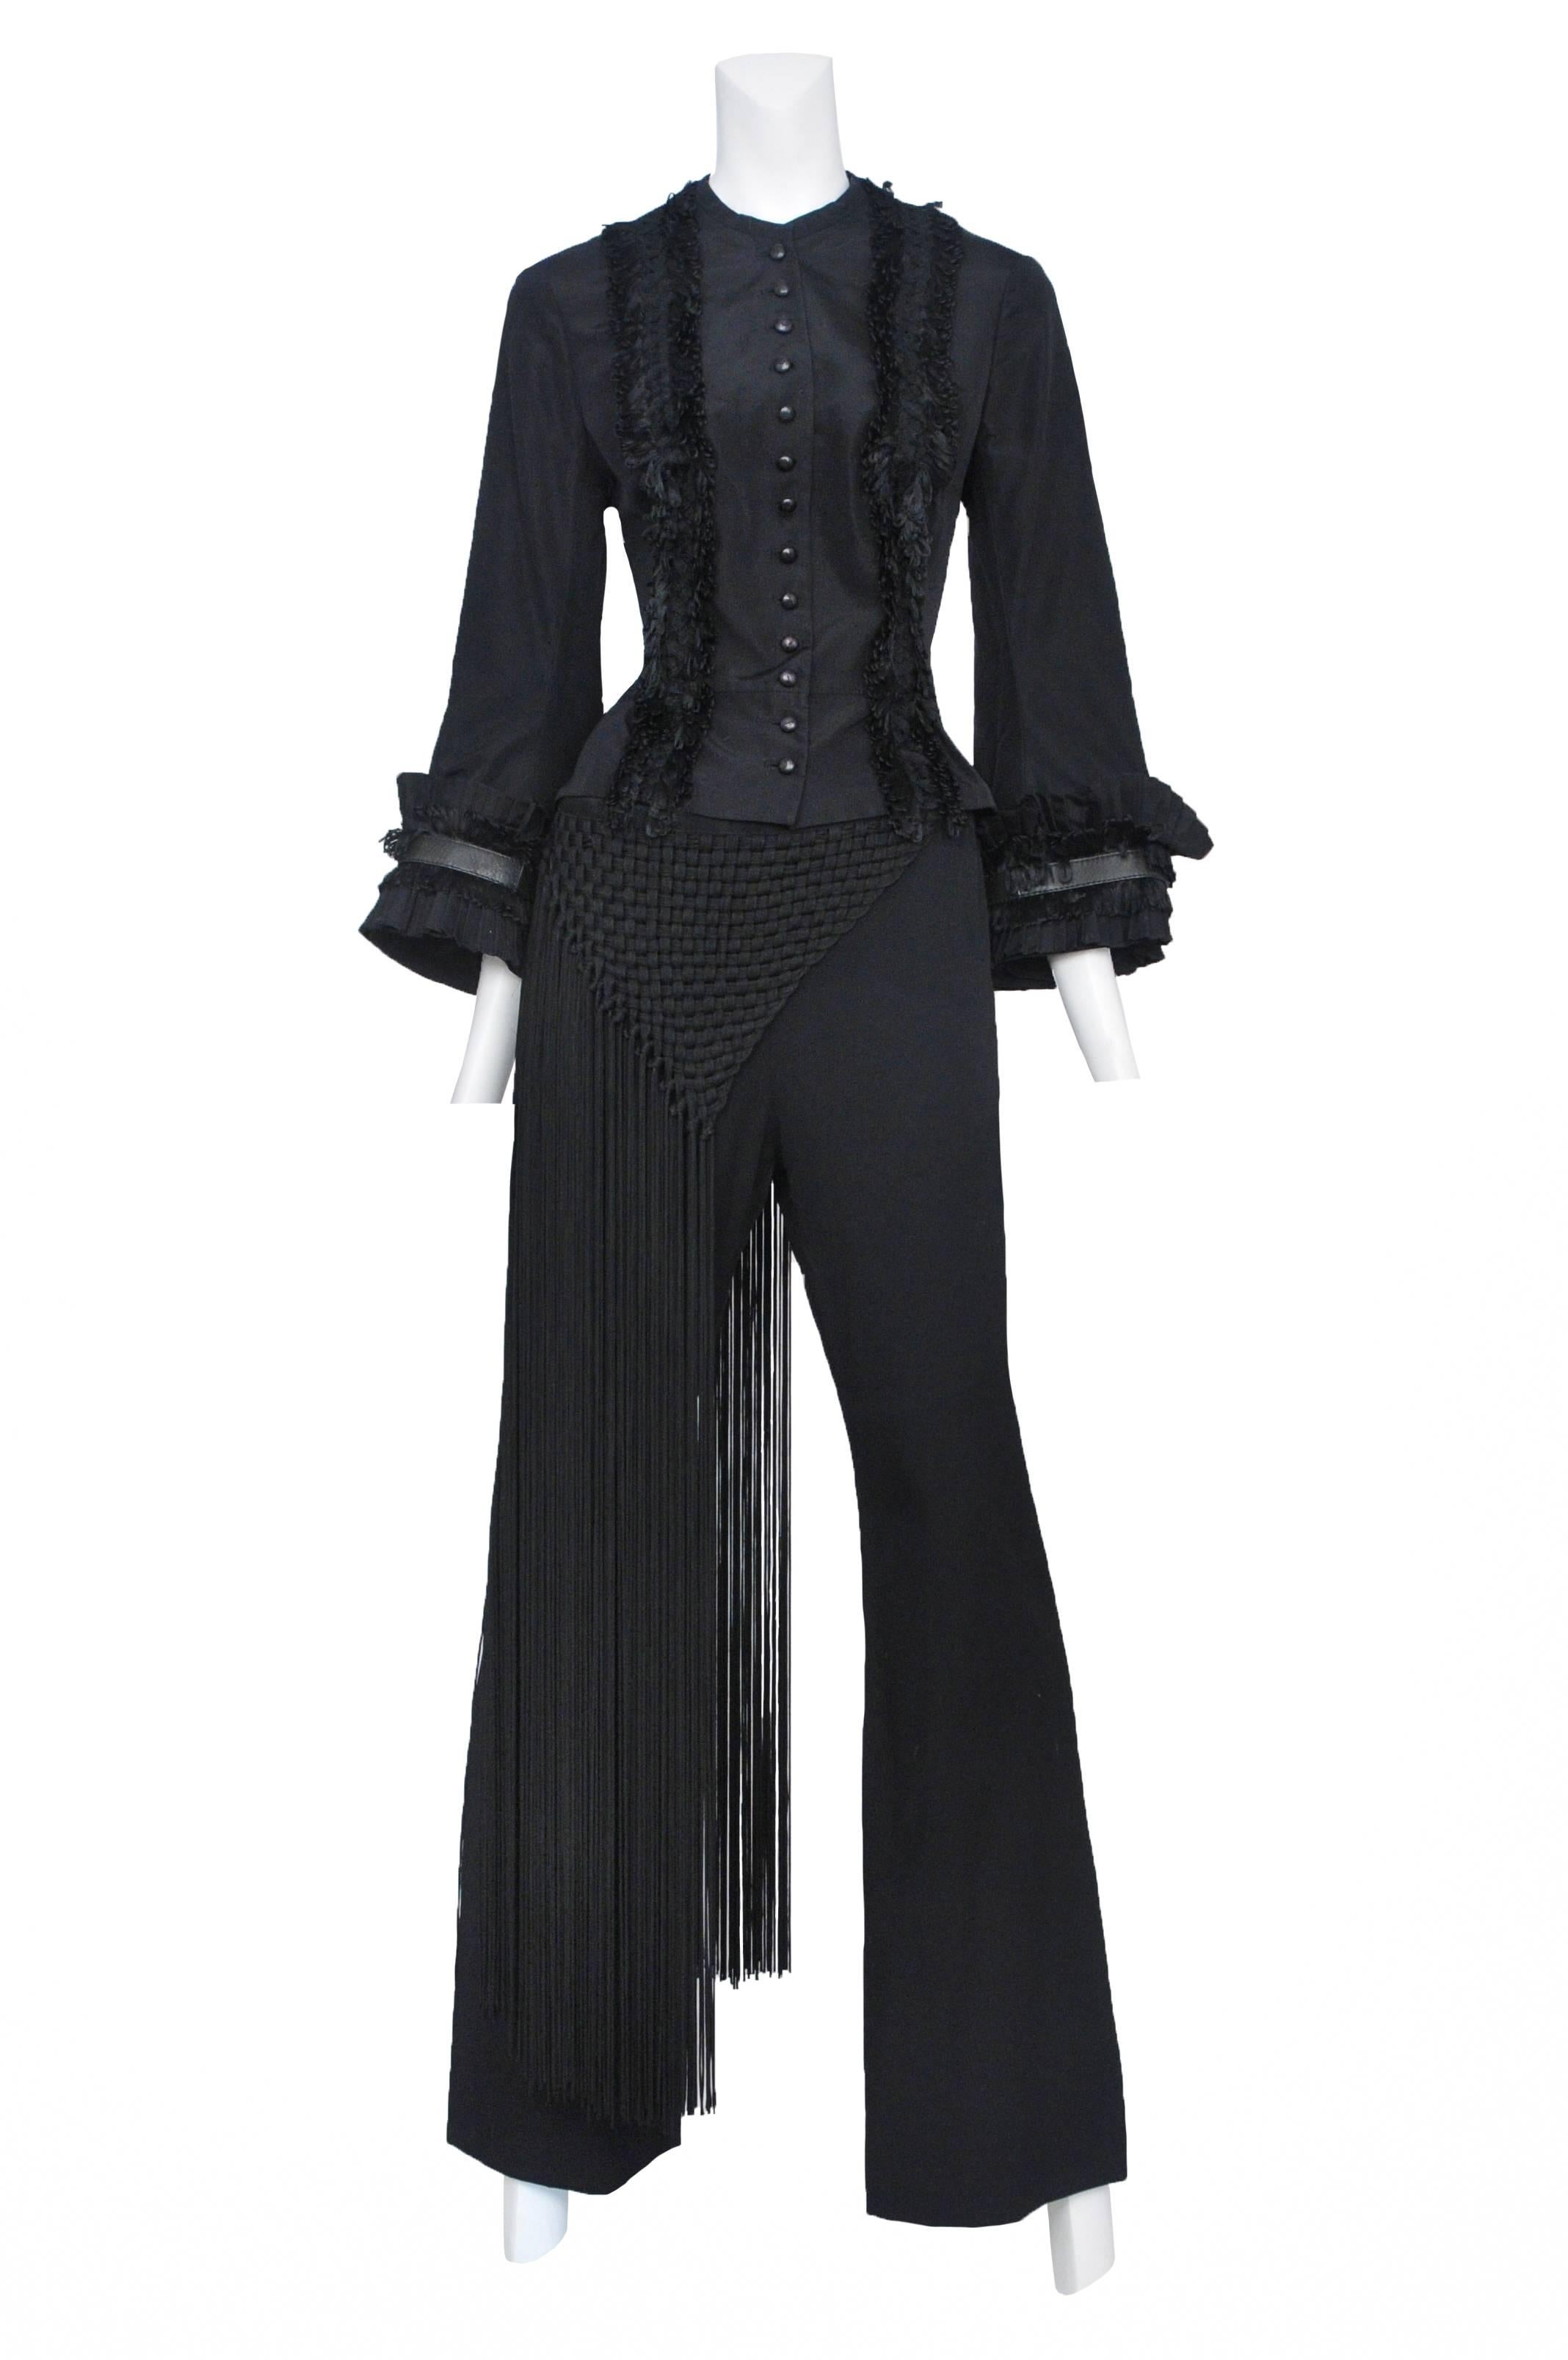 Fitted black taffeta jacket with ruffle trim, pleated sleeve trim and 13 front buttons. Black pants with woven cord detail at front and back with long fringe. Complete Look #49. Supercalifragilisticexpialidocious AW 2002. 